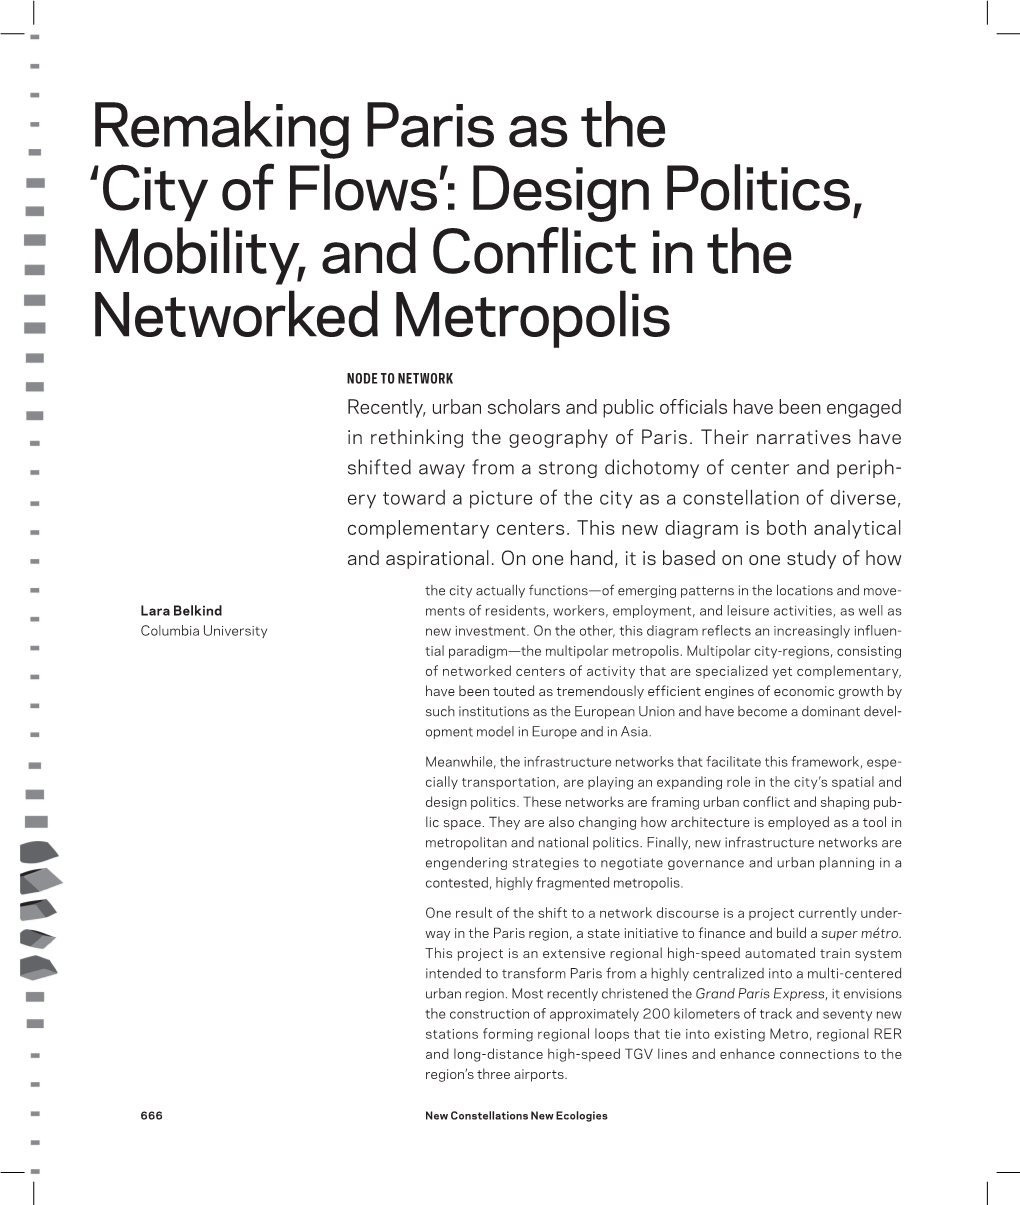 Remaking Paris As the 'City of Flows': Design Politics, Mobility, And